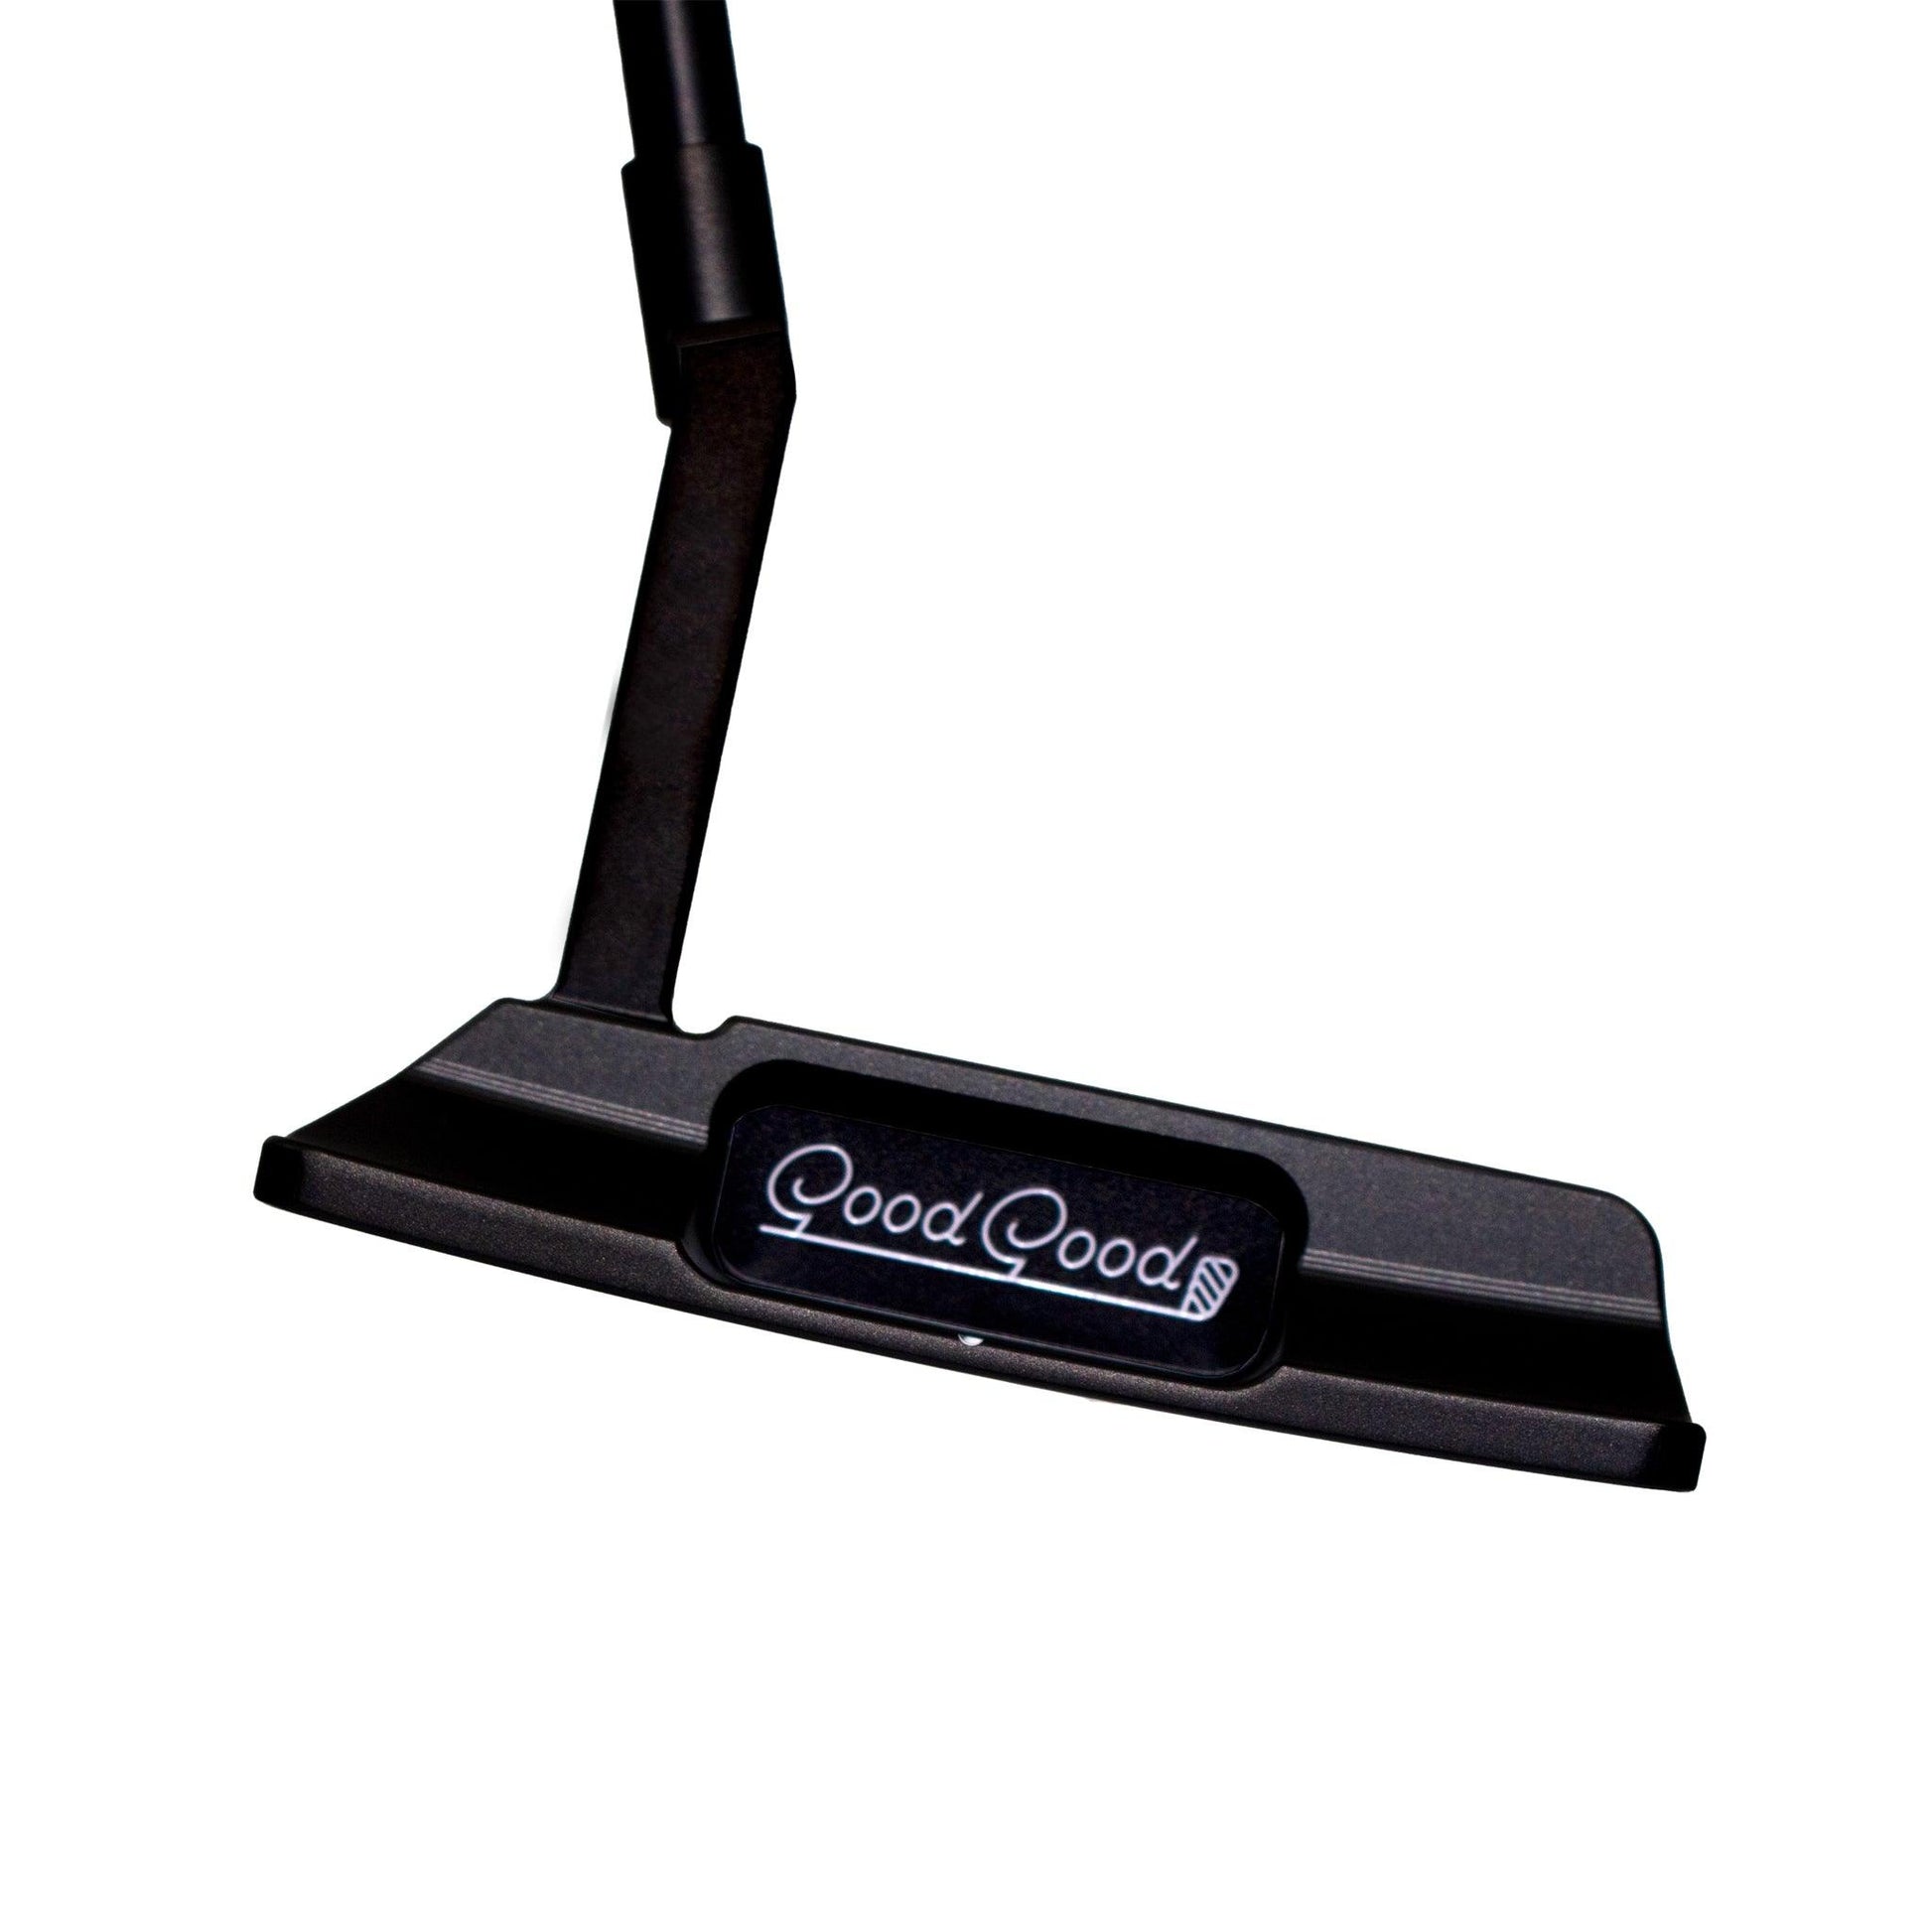 The large blade putter by good good golf